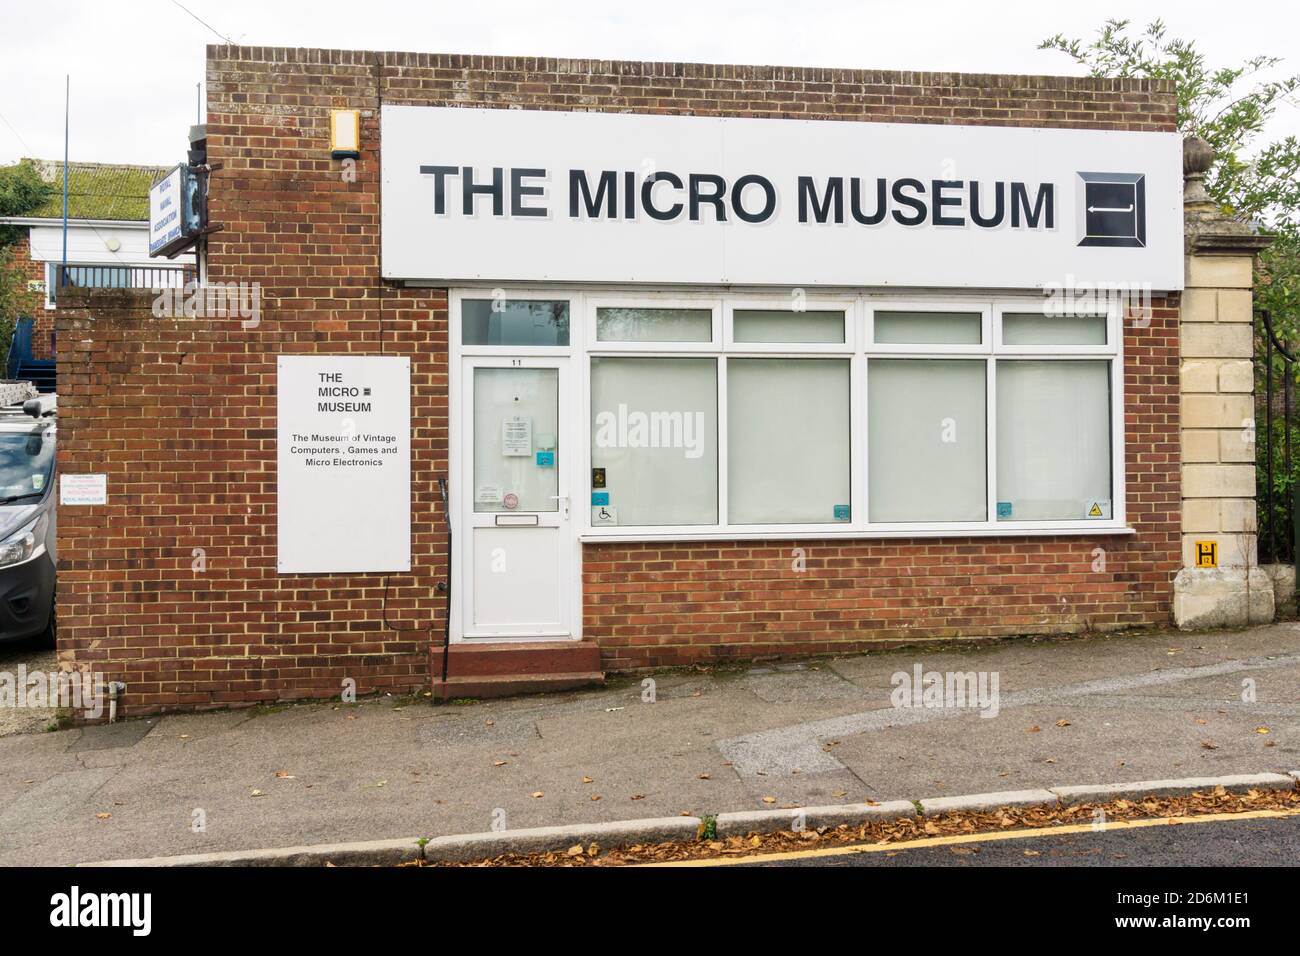 The Micro Museum of vintage computers, games & micro electronics in Ramsgate. Stock Photo